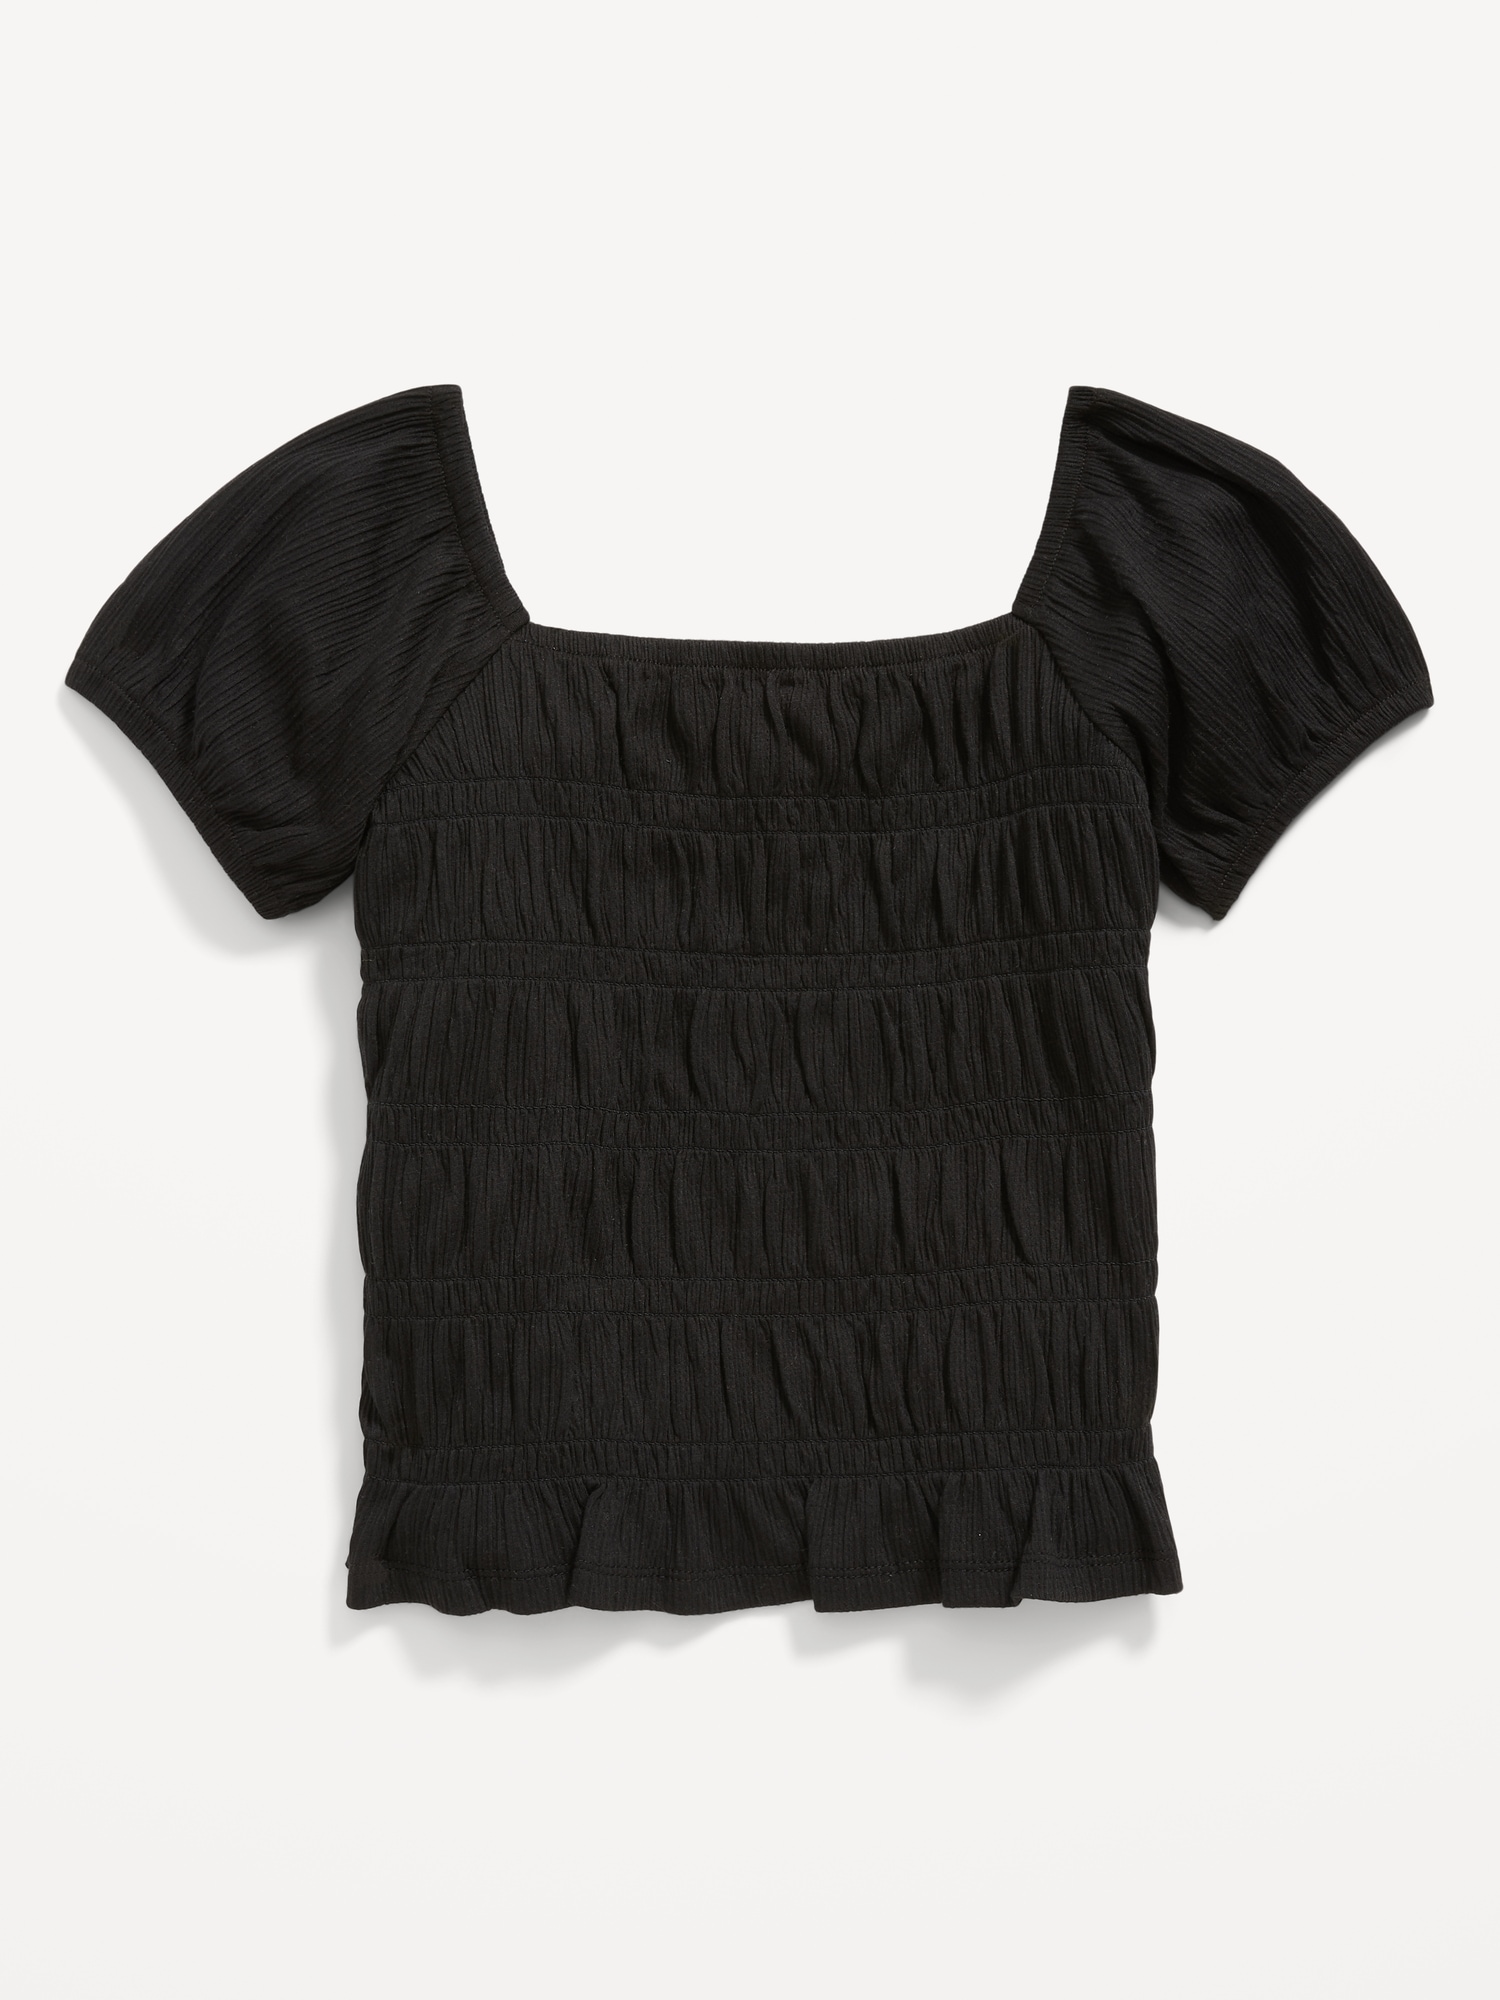 Old Navy Puckered-Jacquard Knit Smocked Top for Girls black. 1